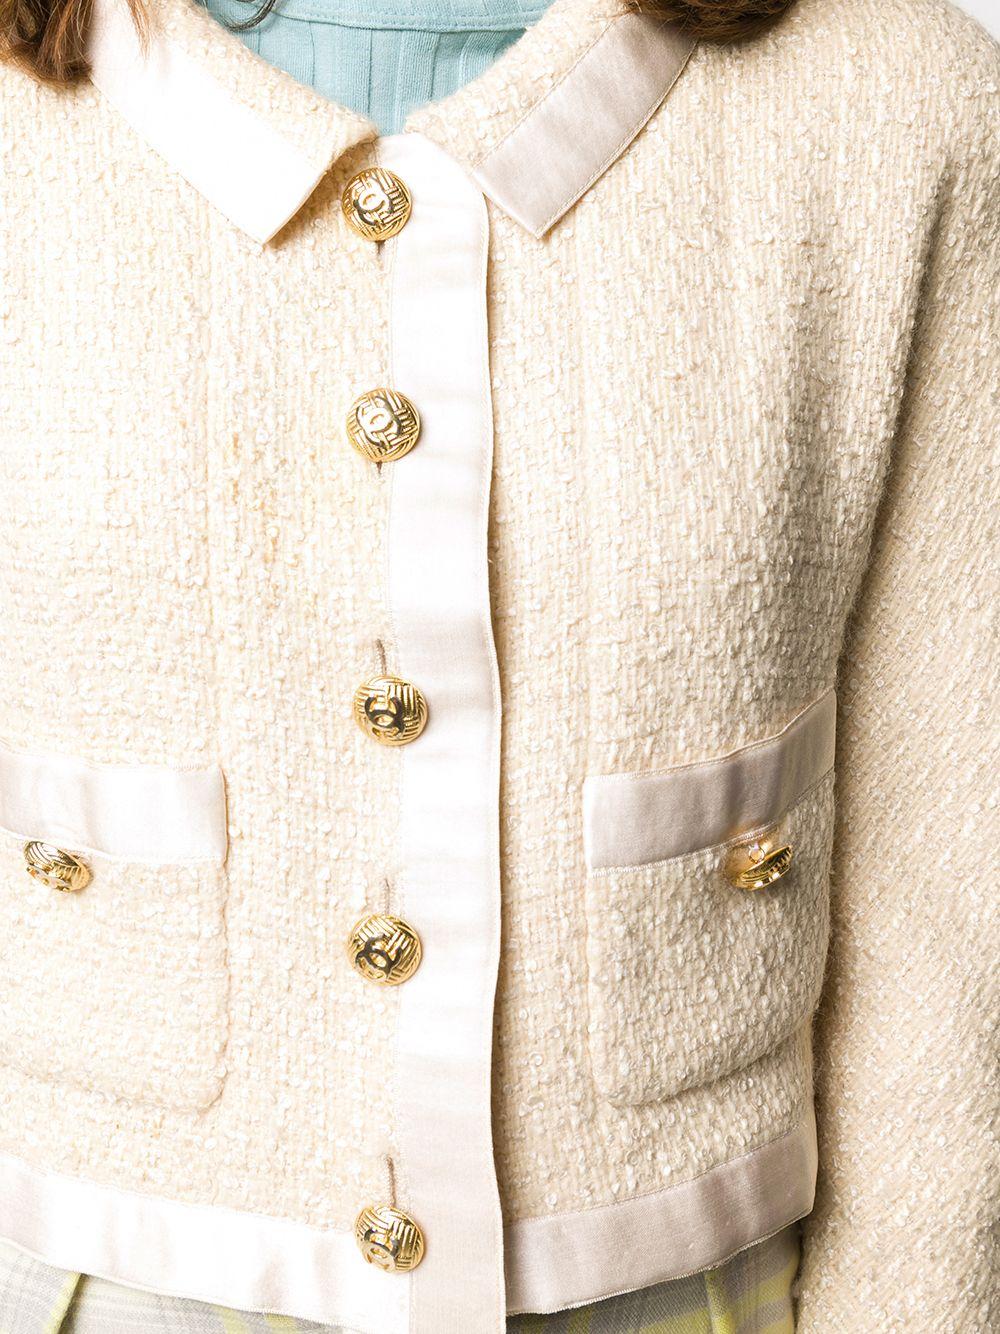 Meticulously crafted in France from a contrasting two-tone palette of cream and ivory tweed, this sophisticated pre-loved skirt suit by Chanel gives a modern update to the brand's signature knit. The jacket features a classic collar, a